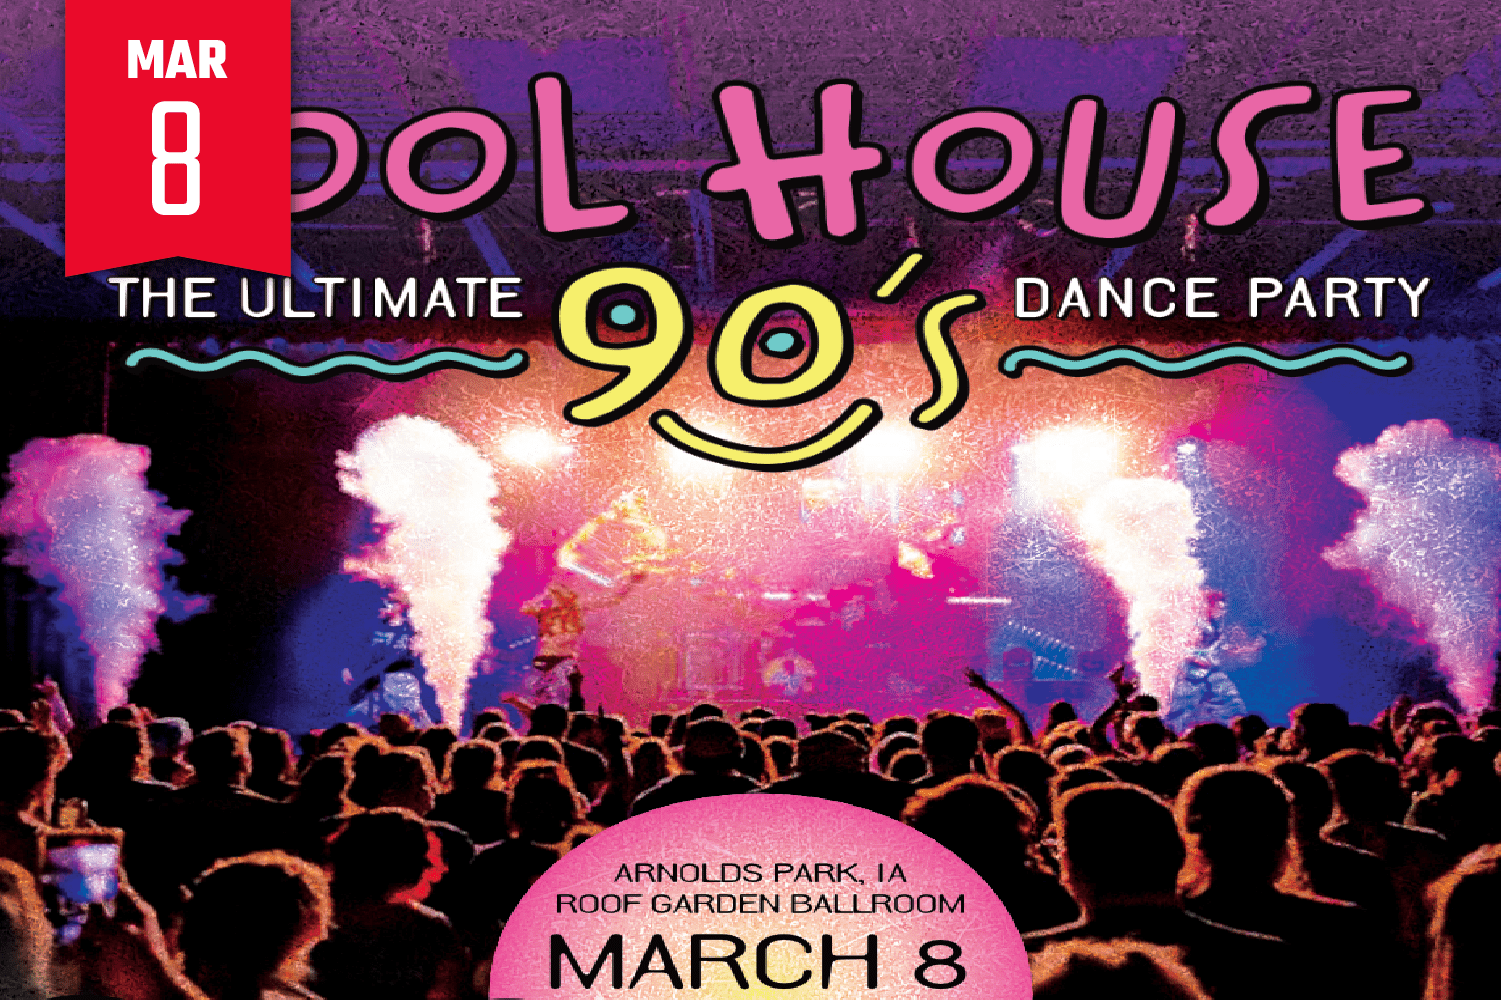 Fool House - The Ultimate 90's Dance Party » Roof Garden Ballroom